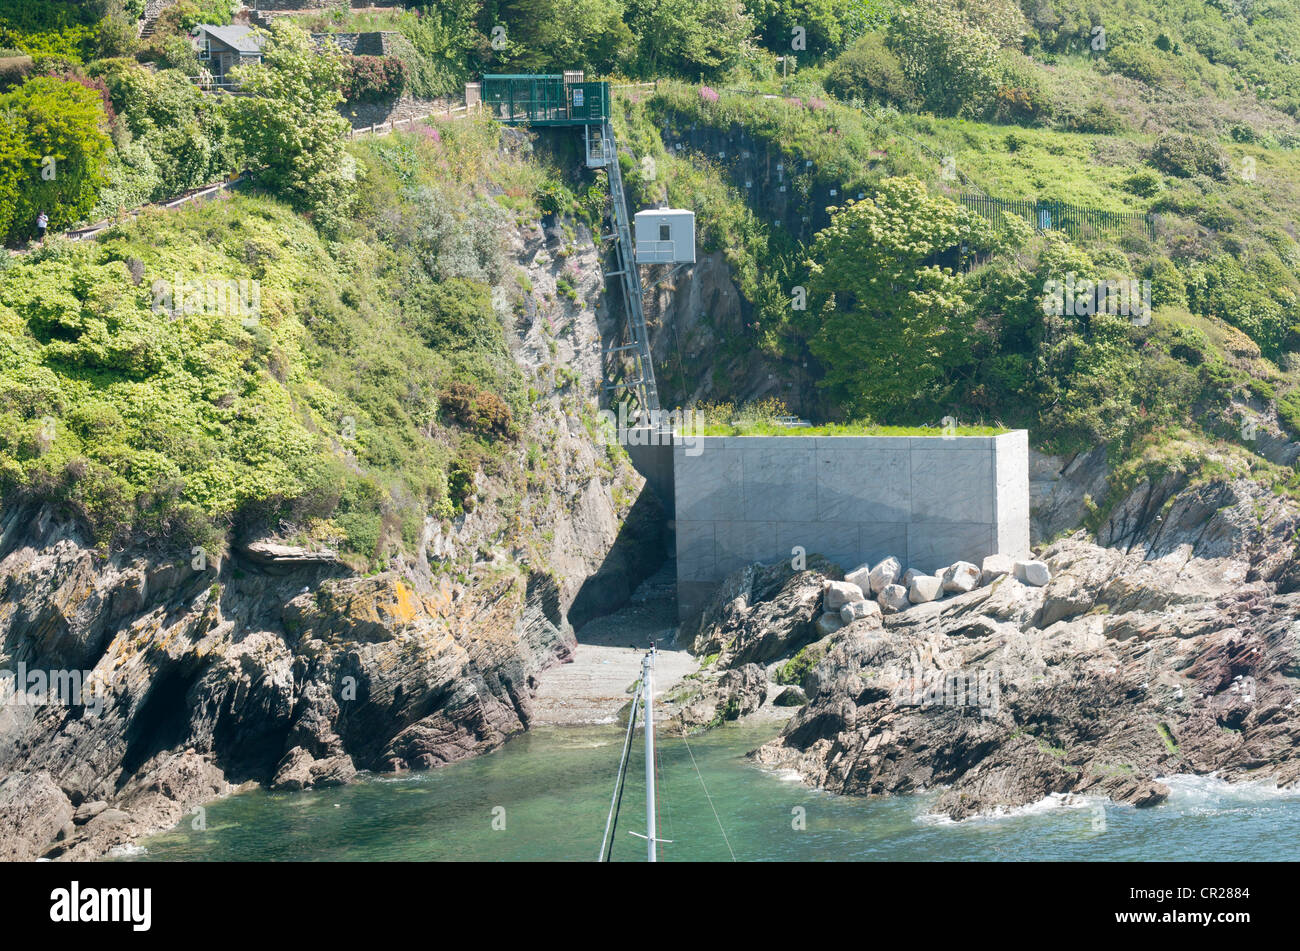 Sewage screening station at Scilly Cove in Polperro, part of South West Water's Clean Sweep programme for a cleaner coast, UK Stock Photo